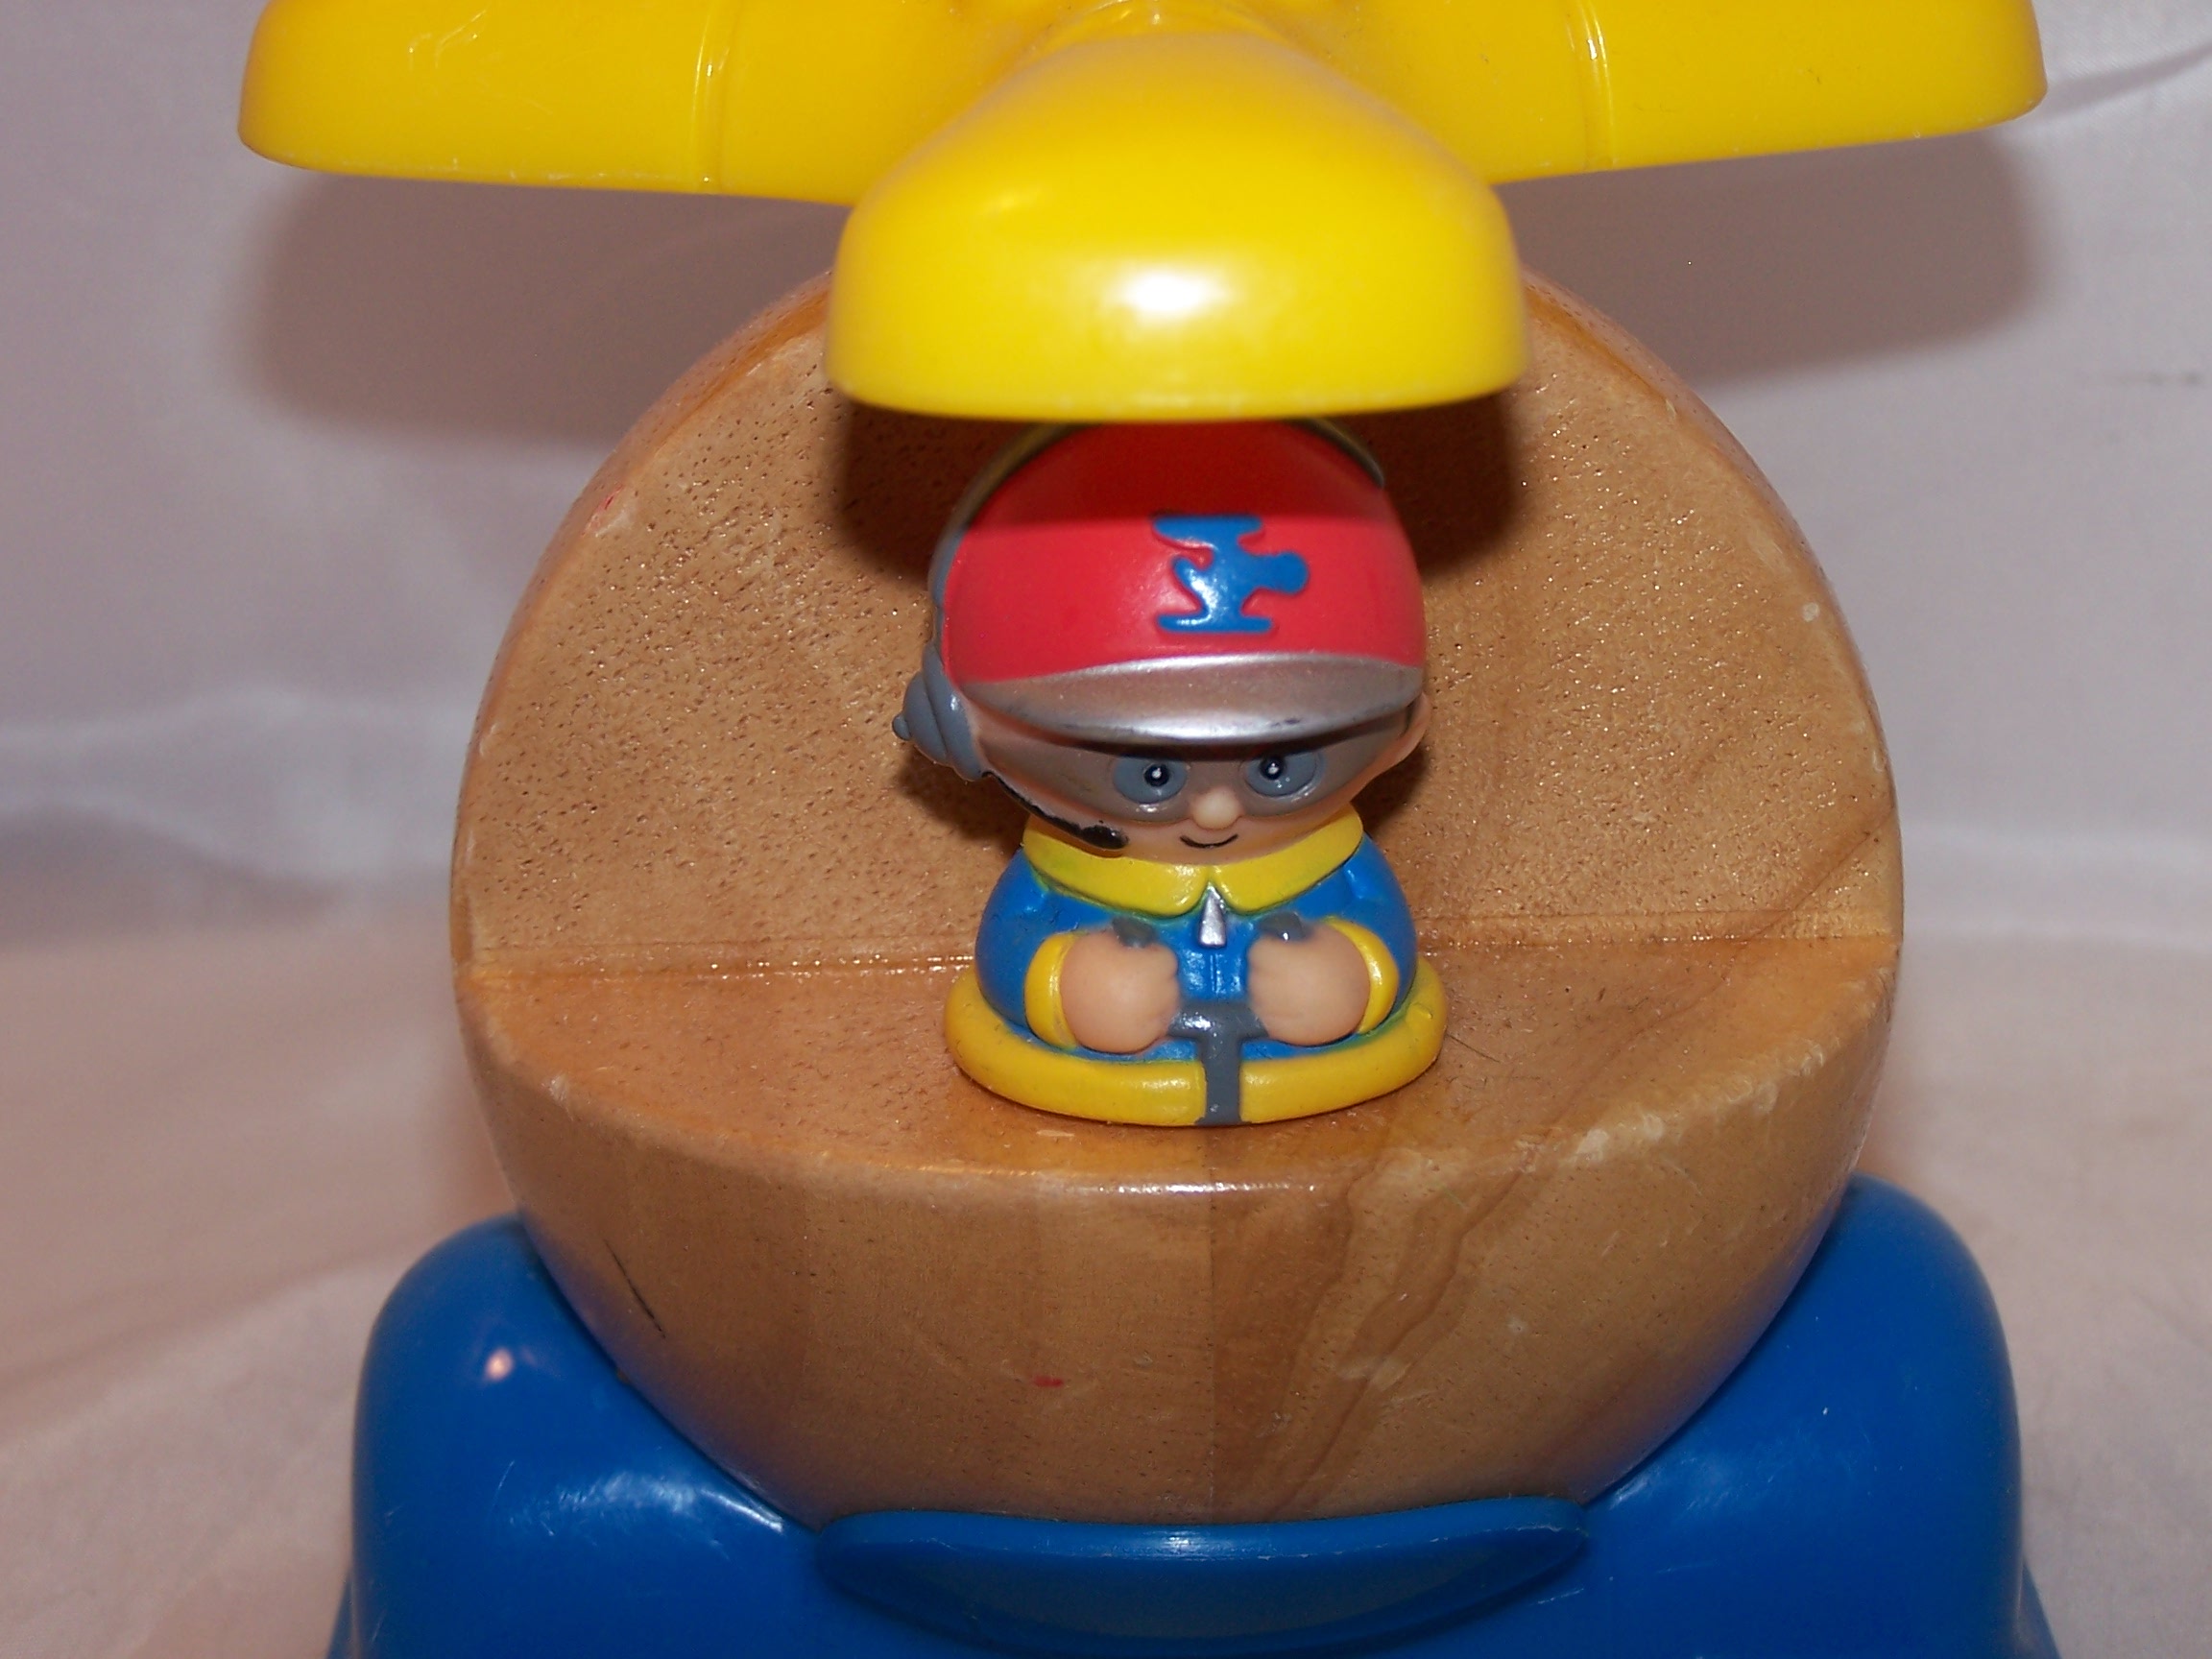 Image 5 of Little Tikes Helicopter w Pilot, Wood, Plastic, Yellow, Blue, Red